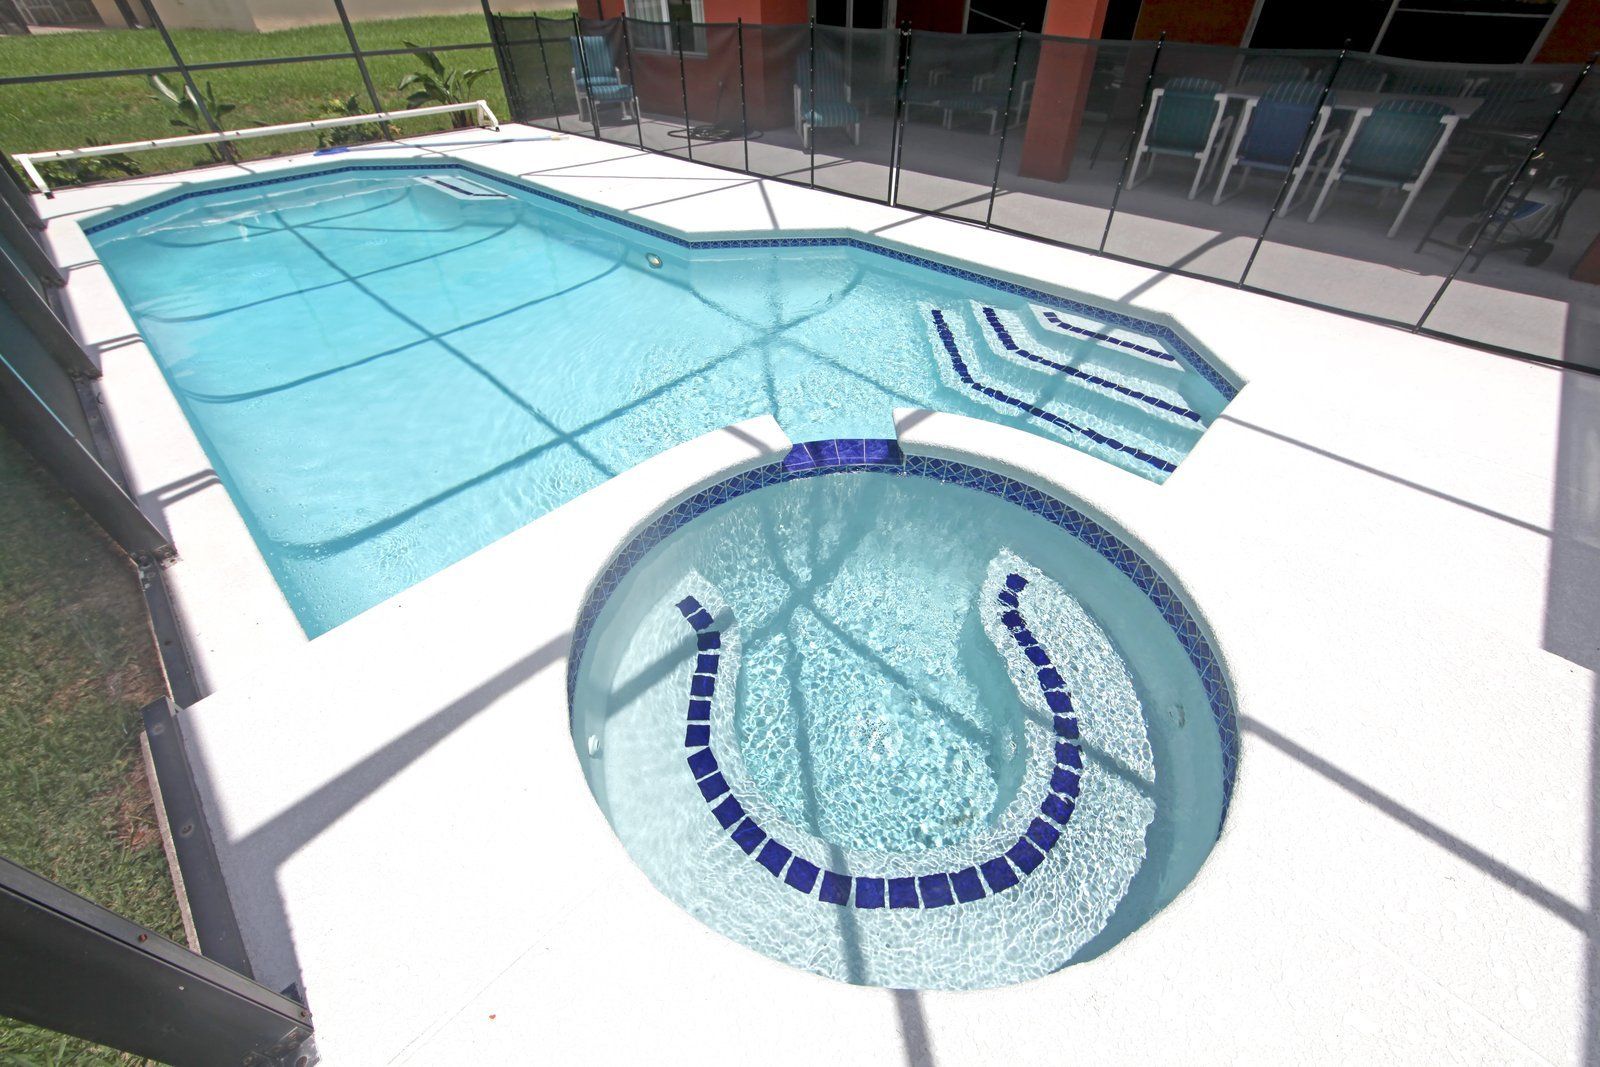 newly repaired outdoor pool